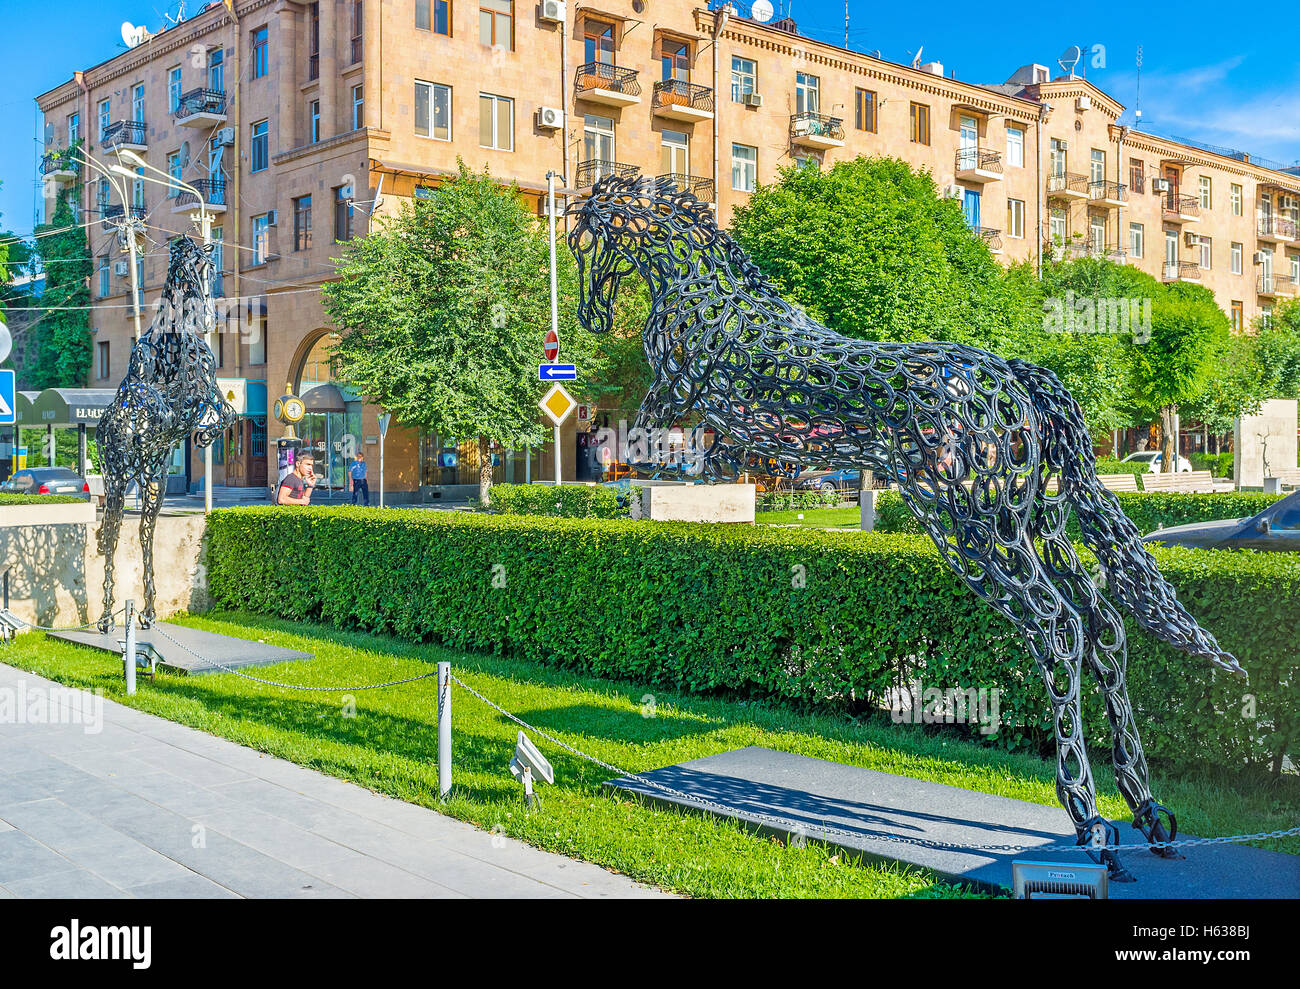 The impressive sculpture of two horses, made of horseshoes, in motin, lcated in Cafesjian sculpture garden, Yerevan Stock Photo